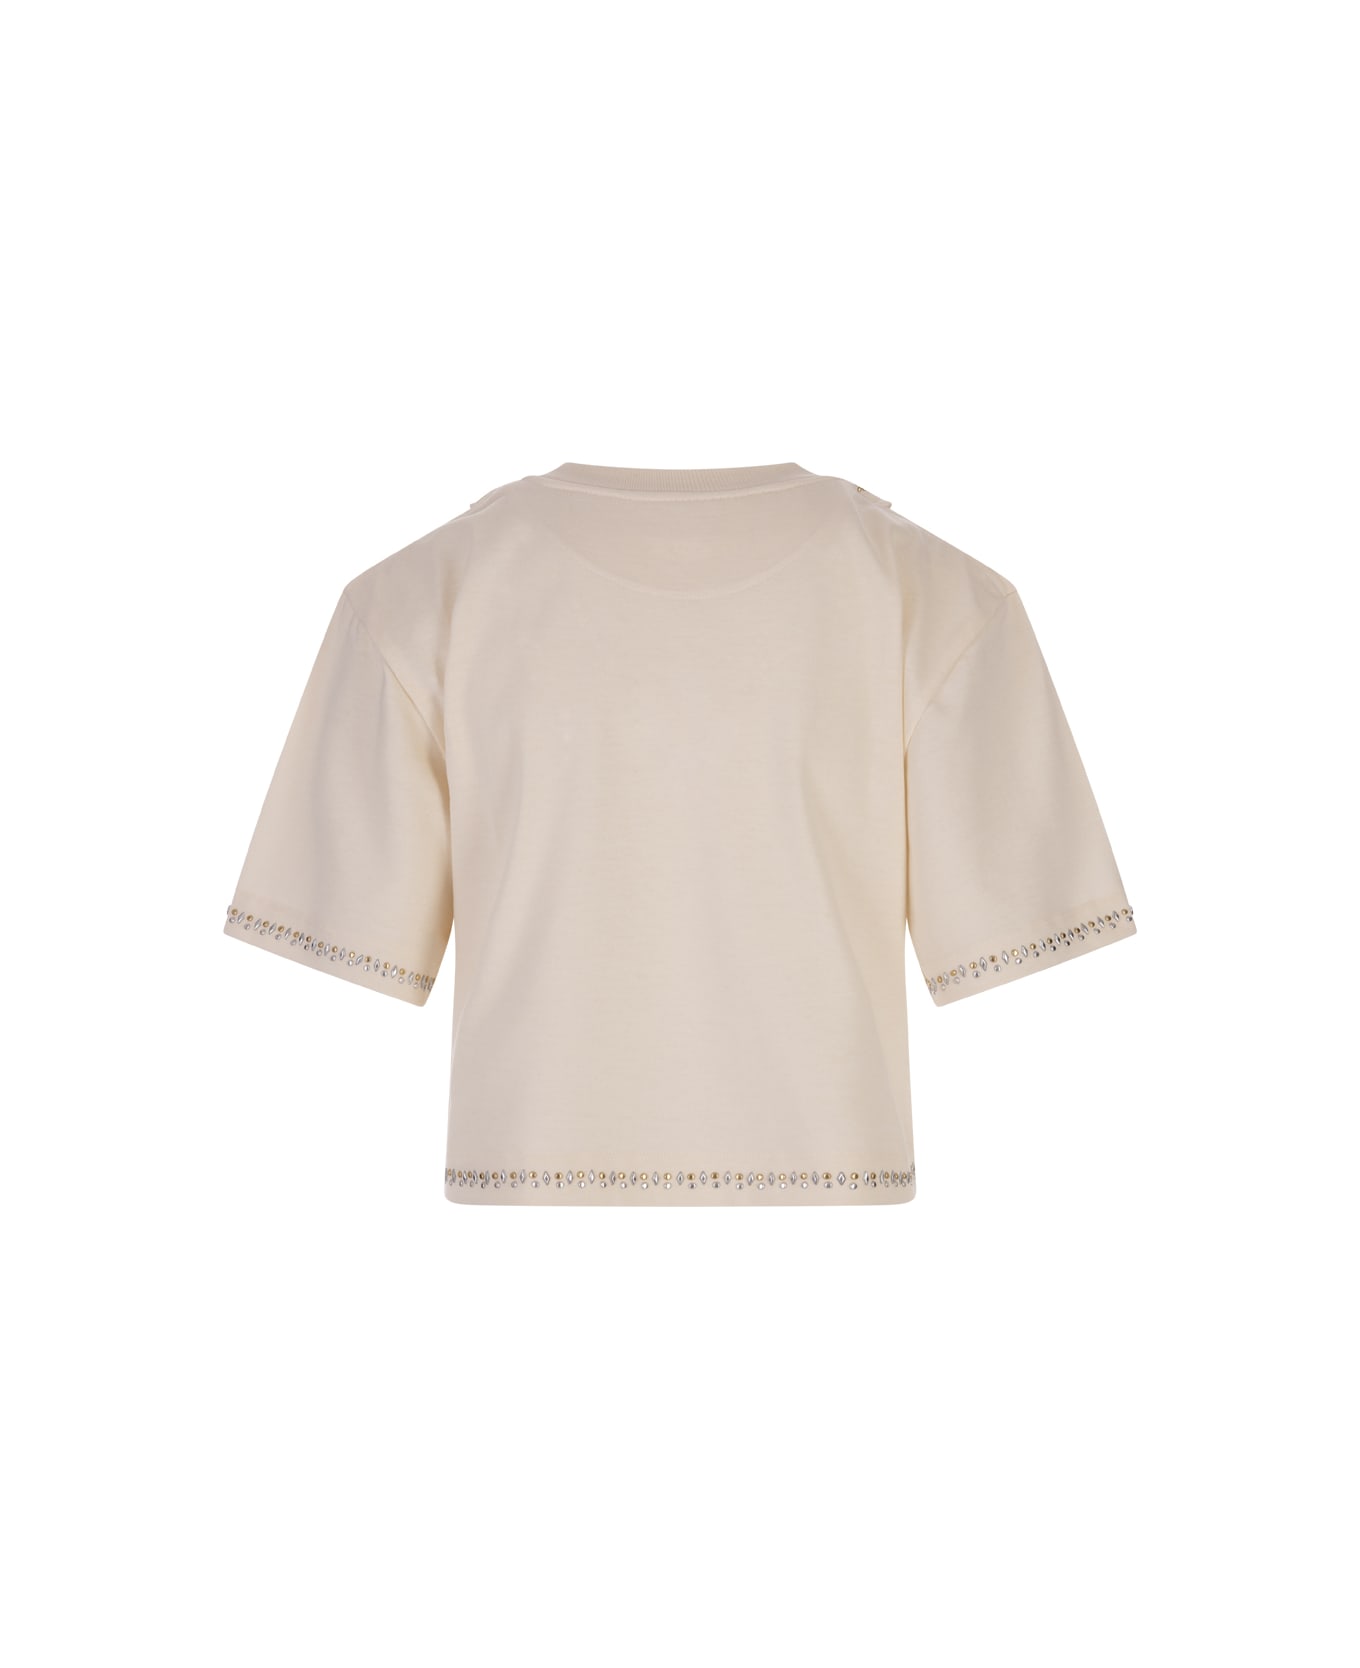 Paco Rabanne Nude Crop T-shirt With Rhinestones In Gold And Silver - White